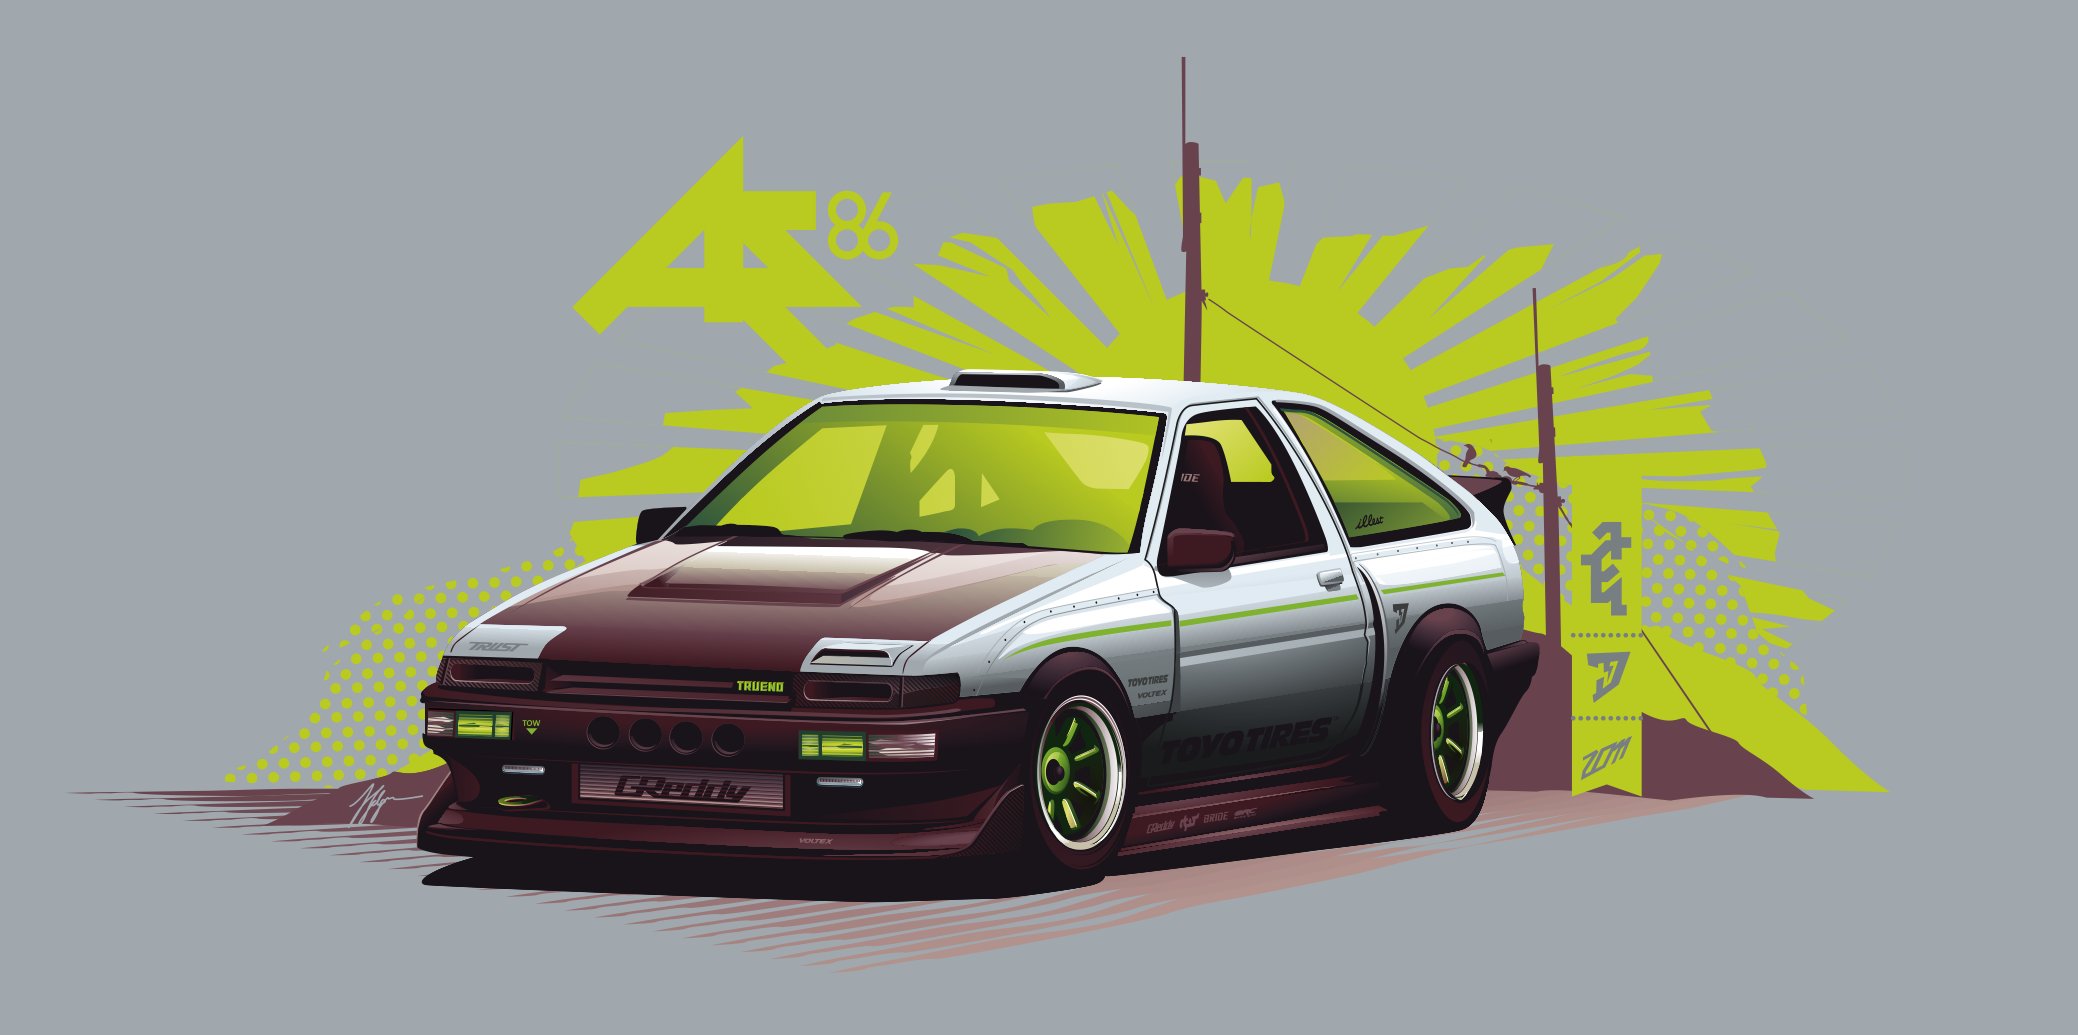 ae86 Trueno Vector Wallpapers HD Desktop and Mobile Backgrounds